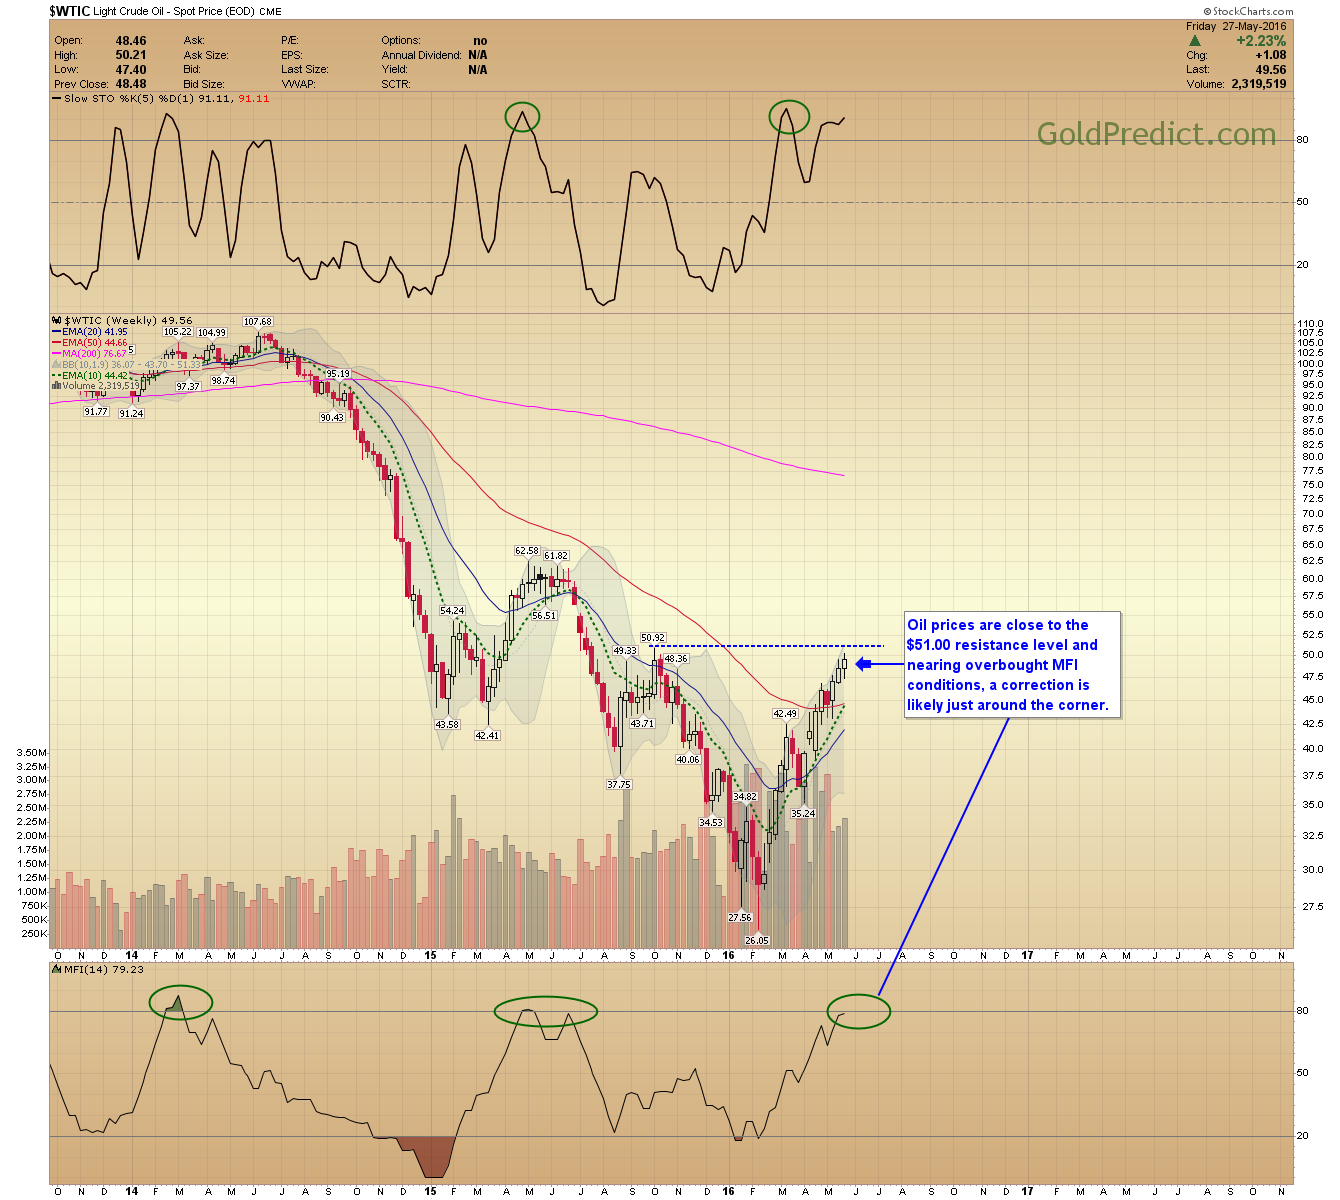 WTIC Weekly Chart